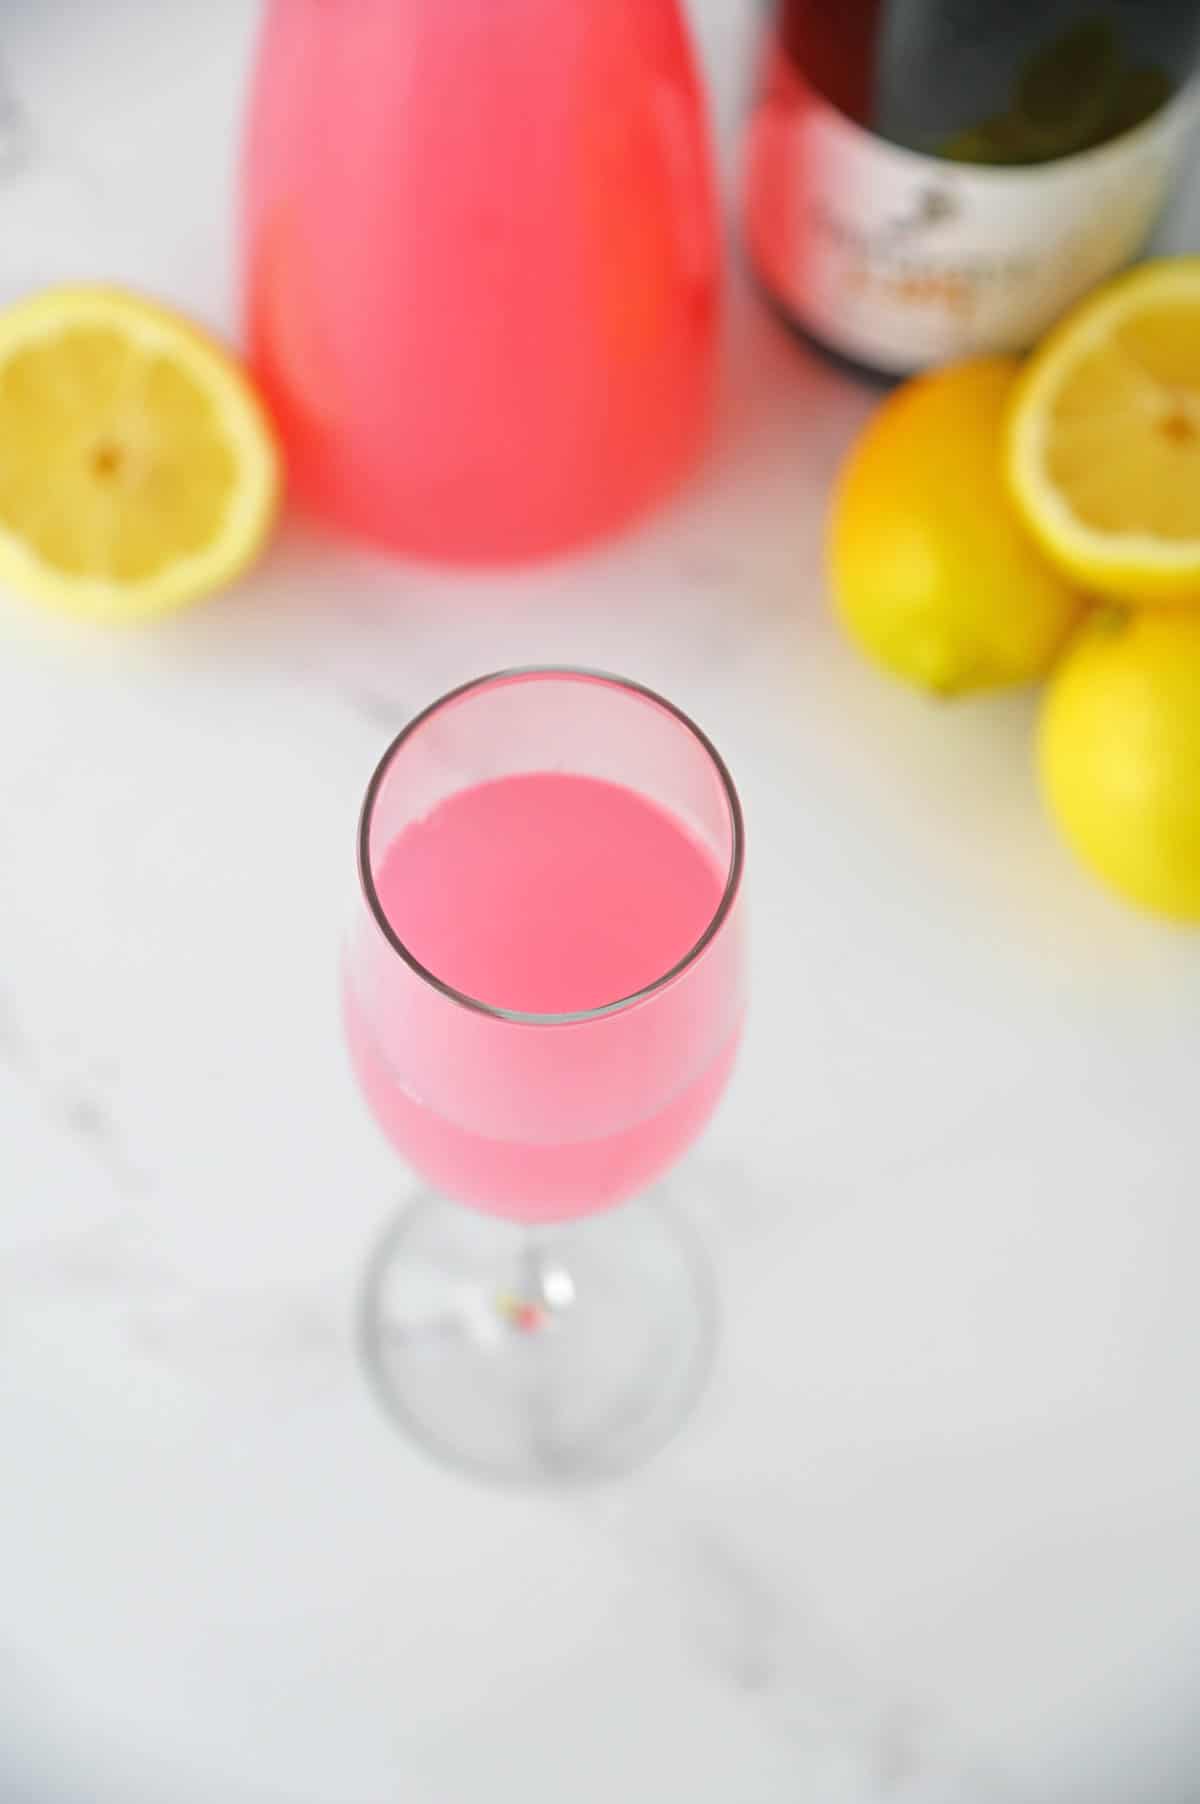 Pink lemonade in a champagne flute.